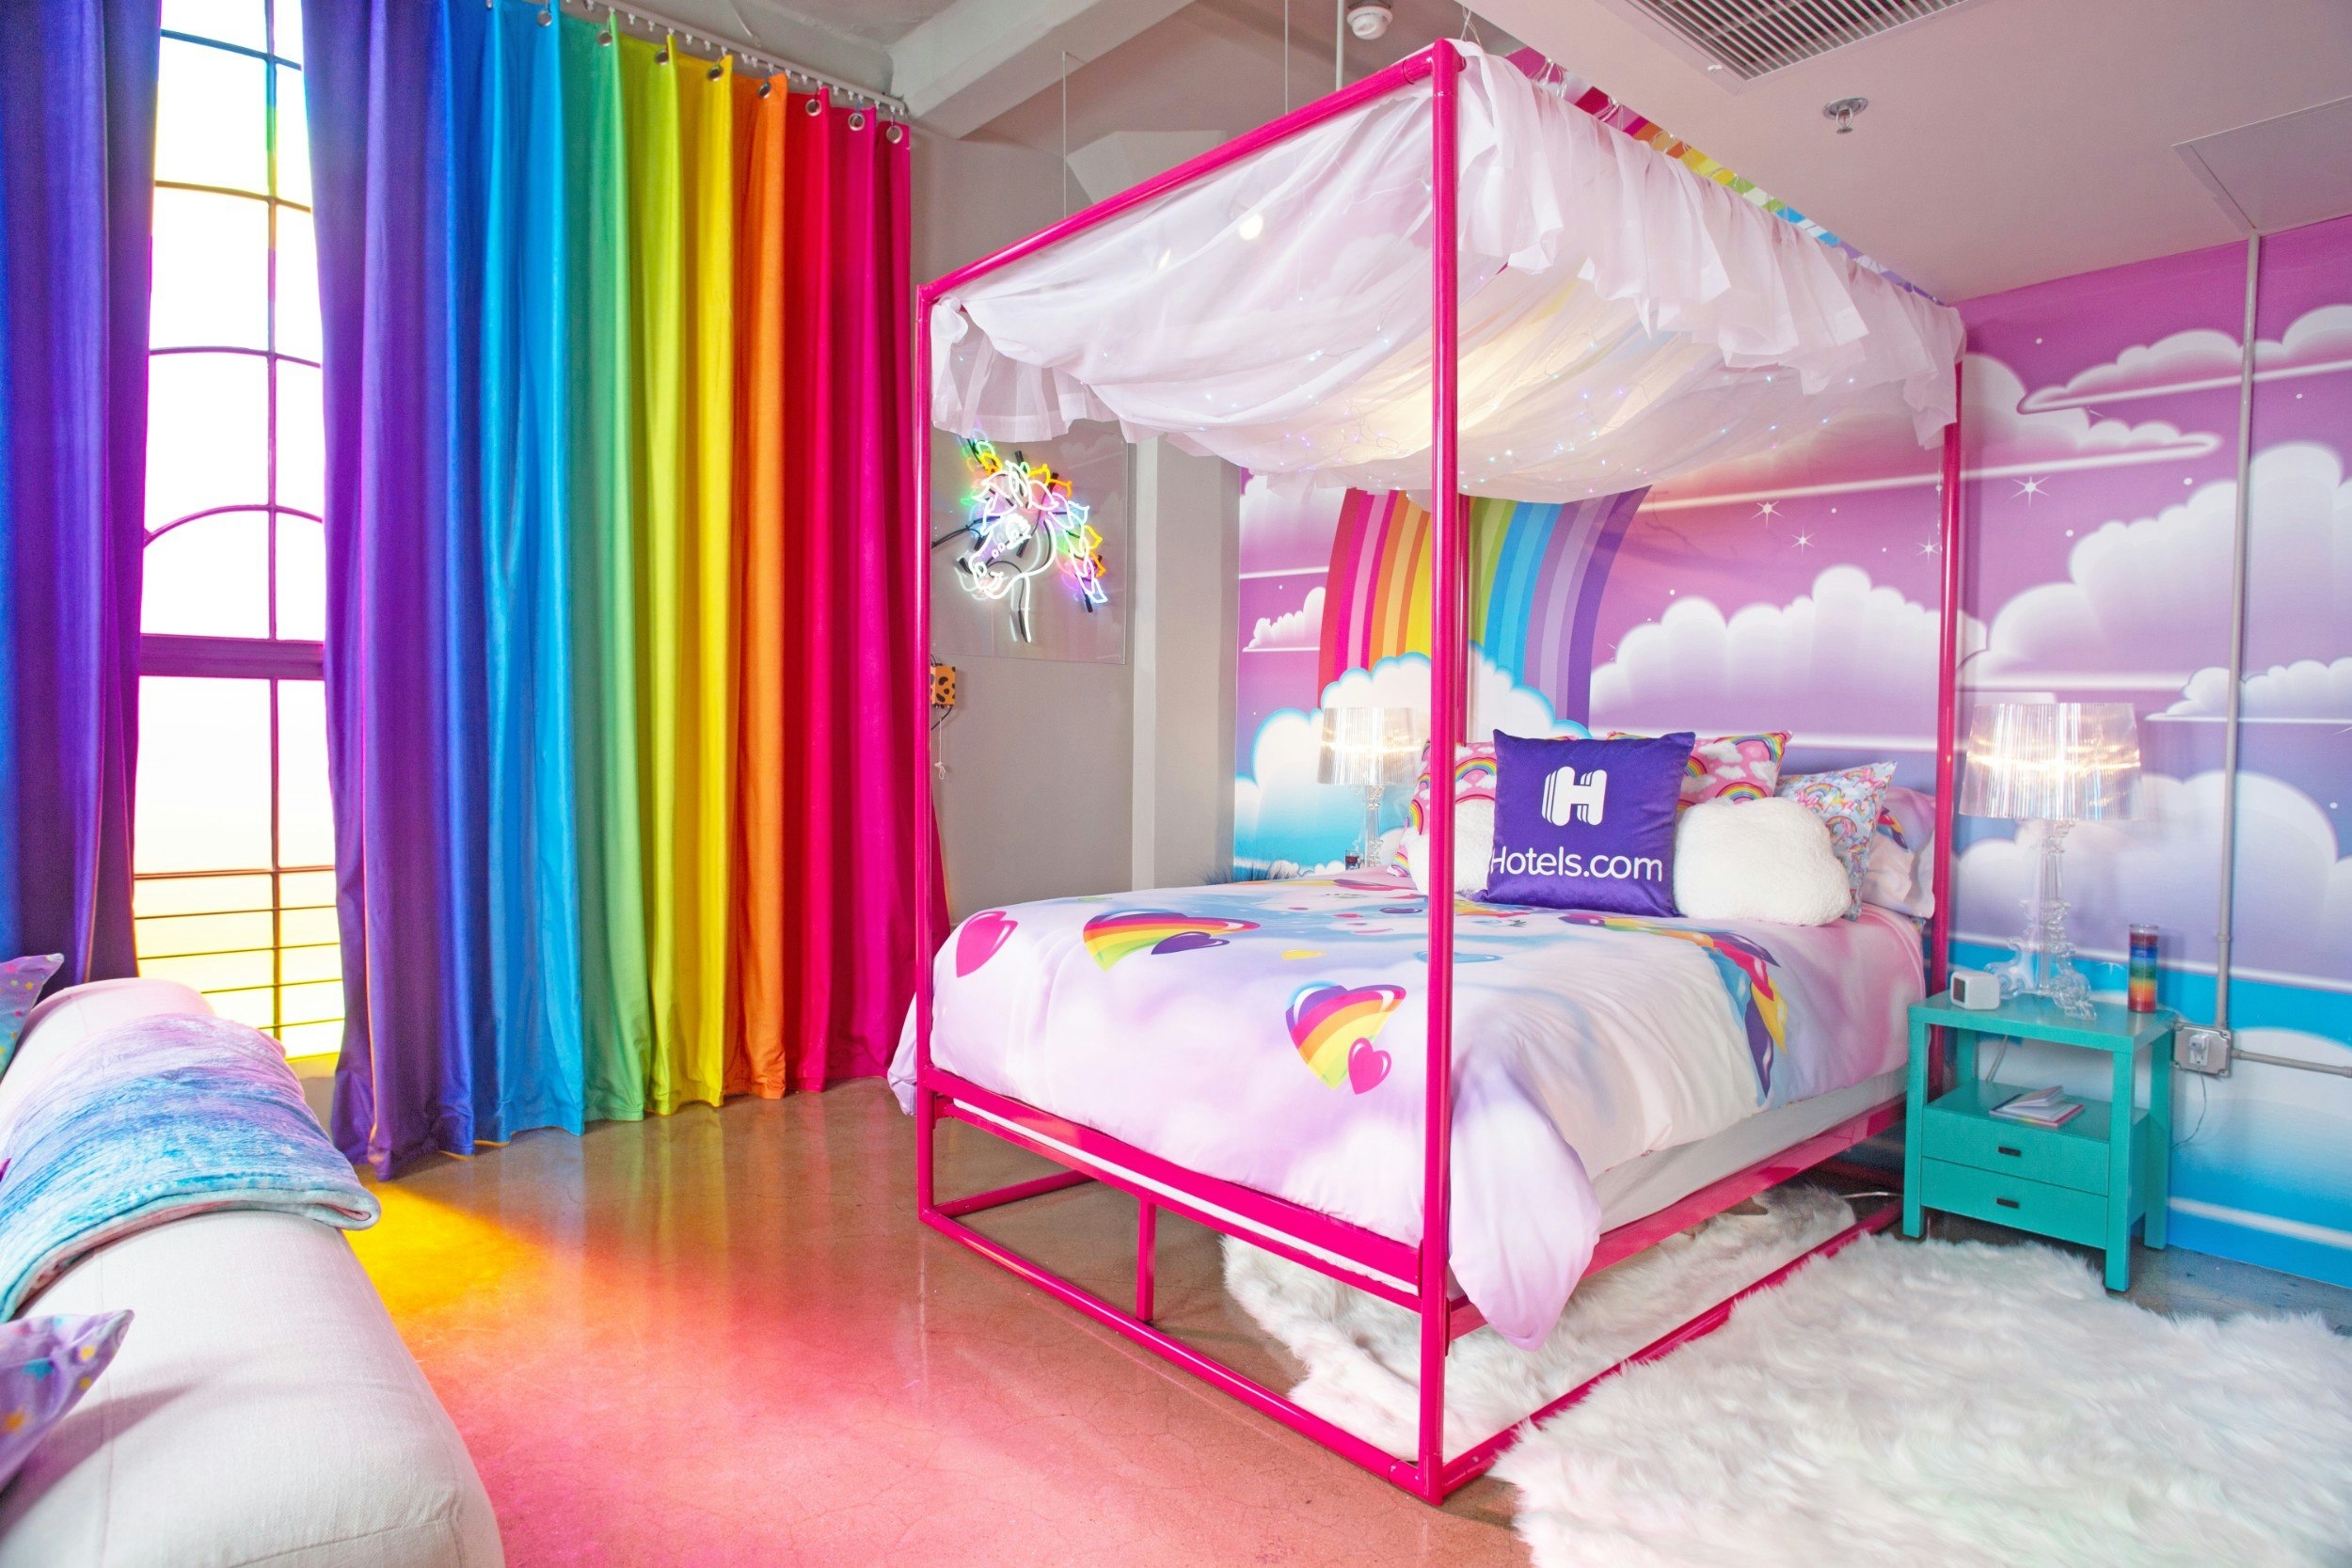 The colourful bedroom at the Lisa Frank Flat, complete with rainbow curtains